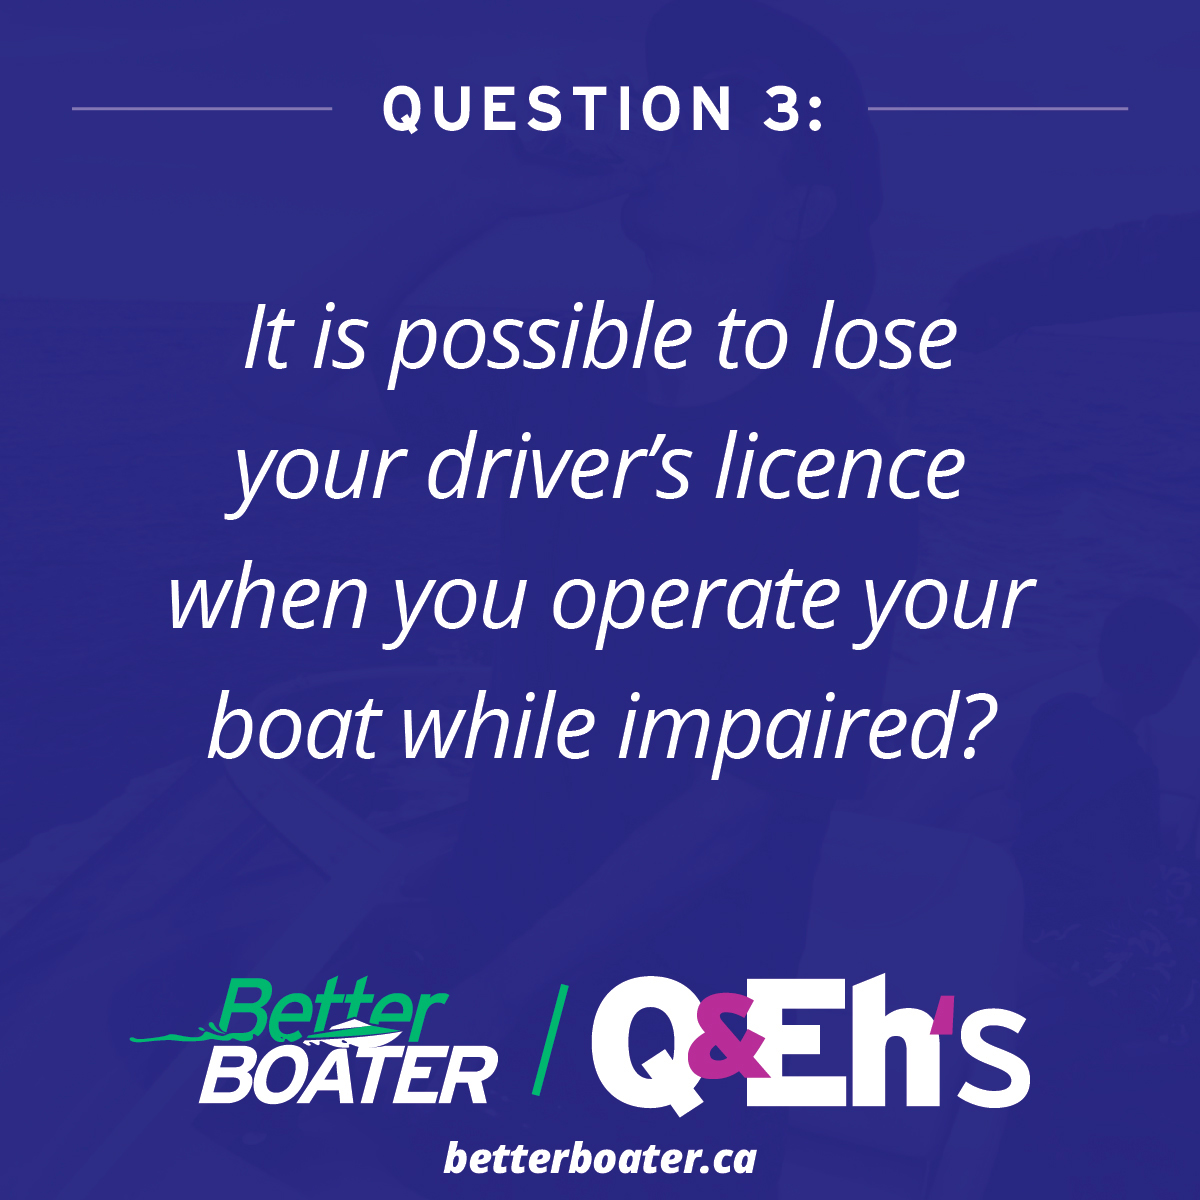 https://betterboater.ca/Lose%20Licence